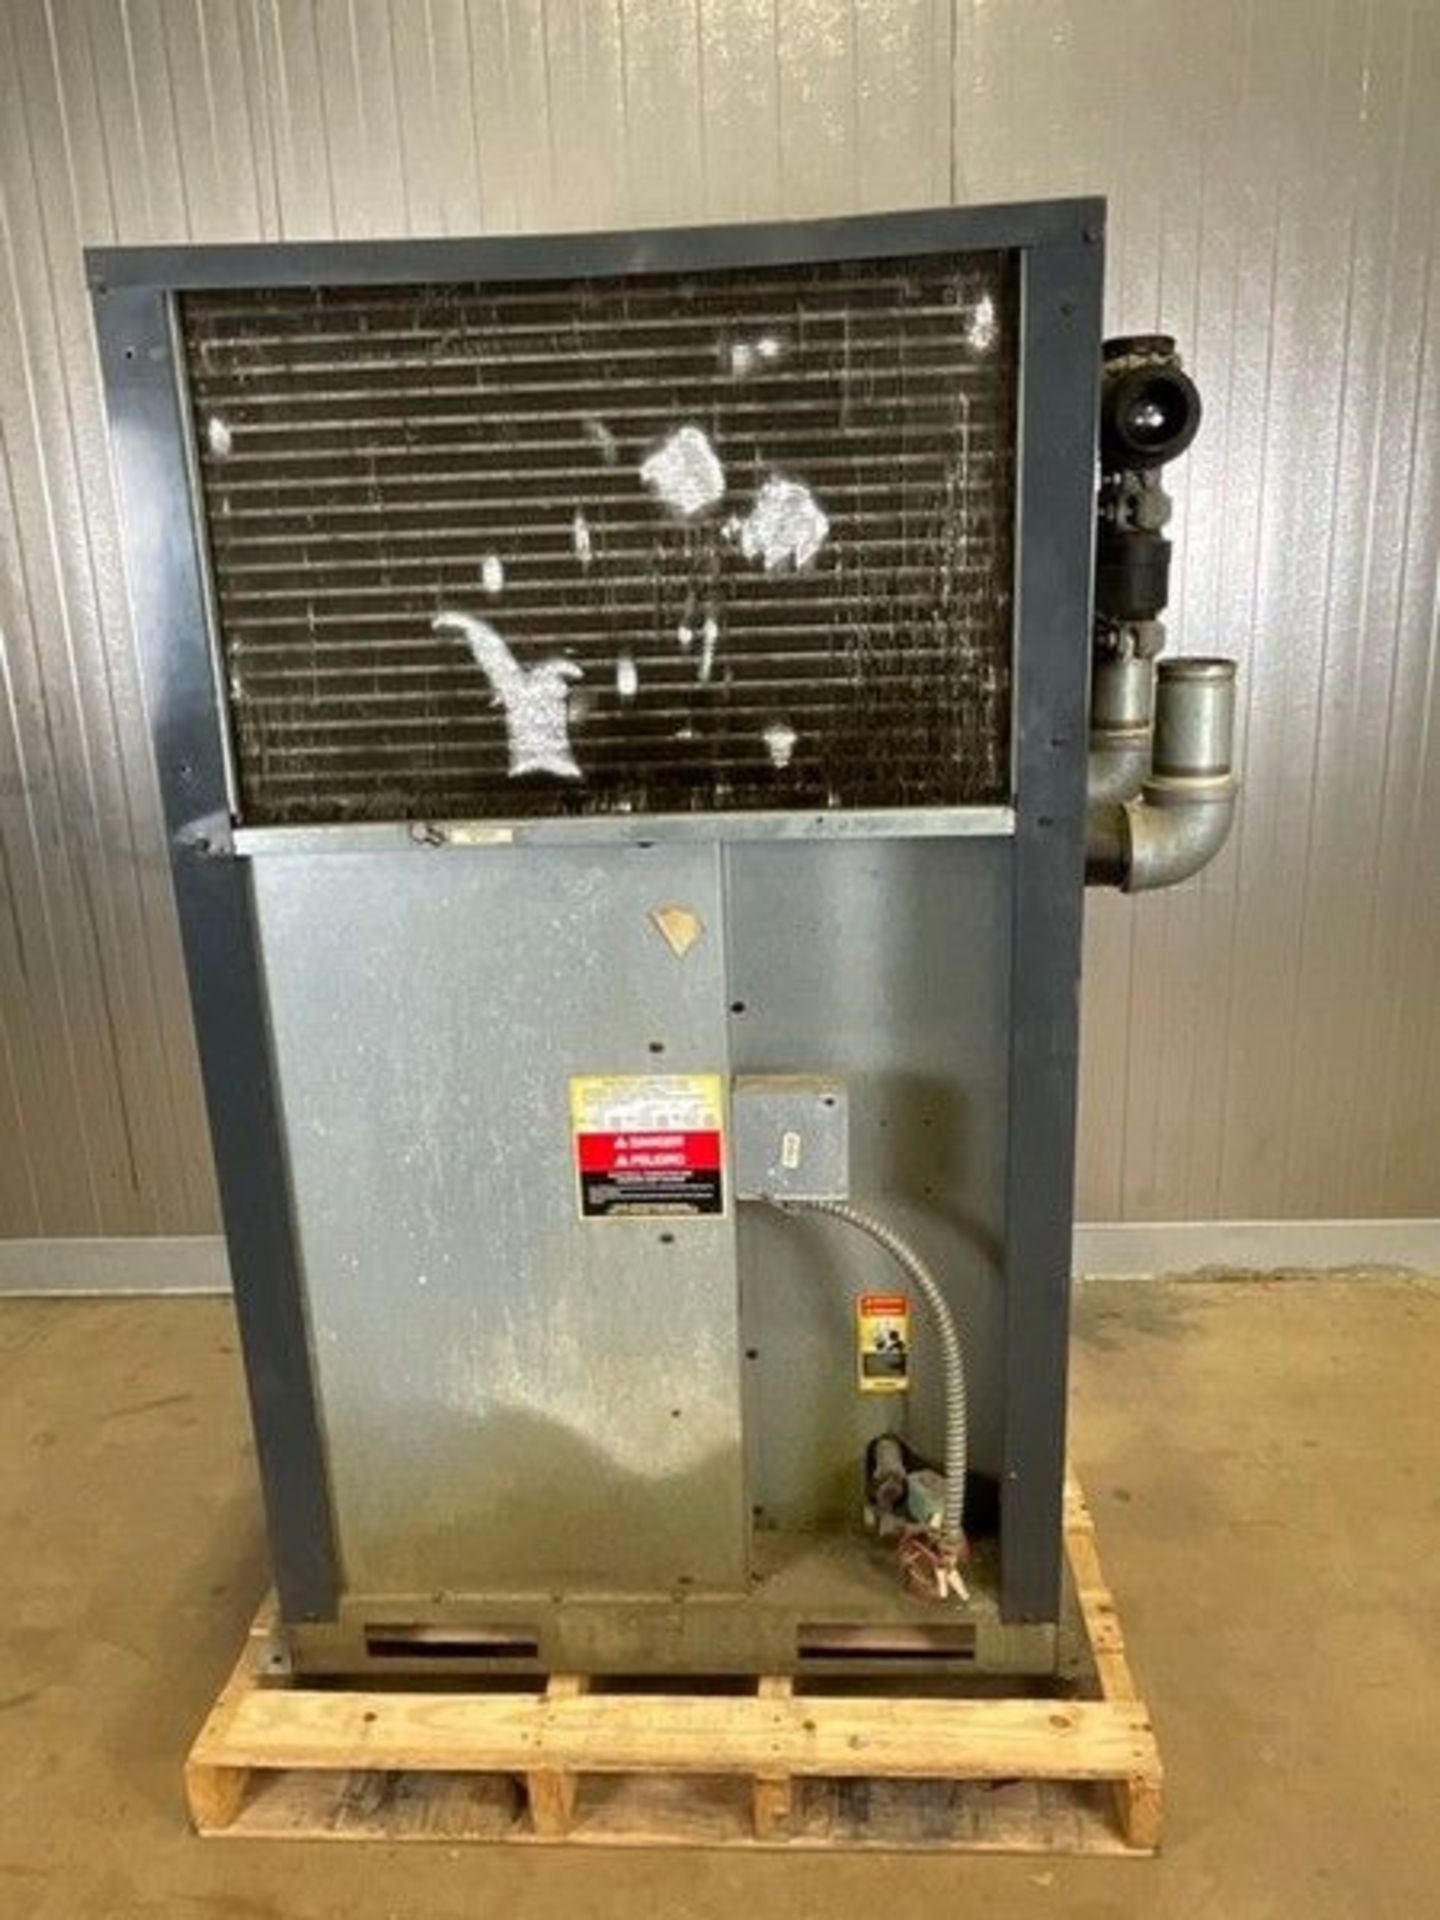 Zeks Air Dryer, M/N 500HSFA400, S/N 248613, R404 Refrigerant, 460 Volts, 3 Phase (Auction ID - Image 3 of 6